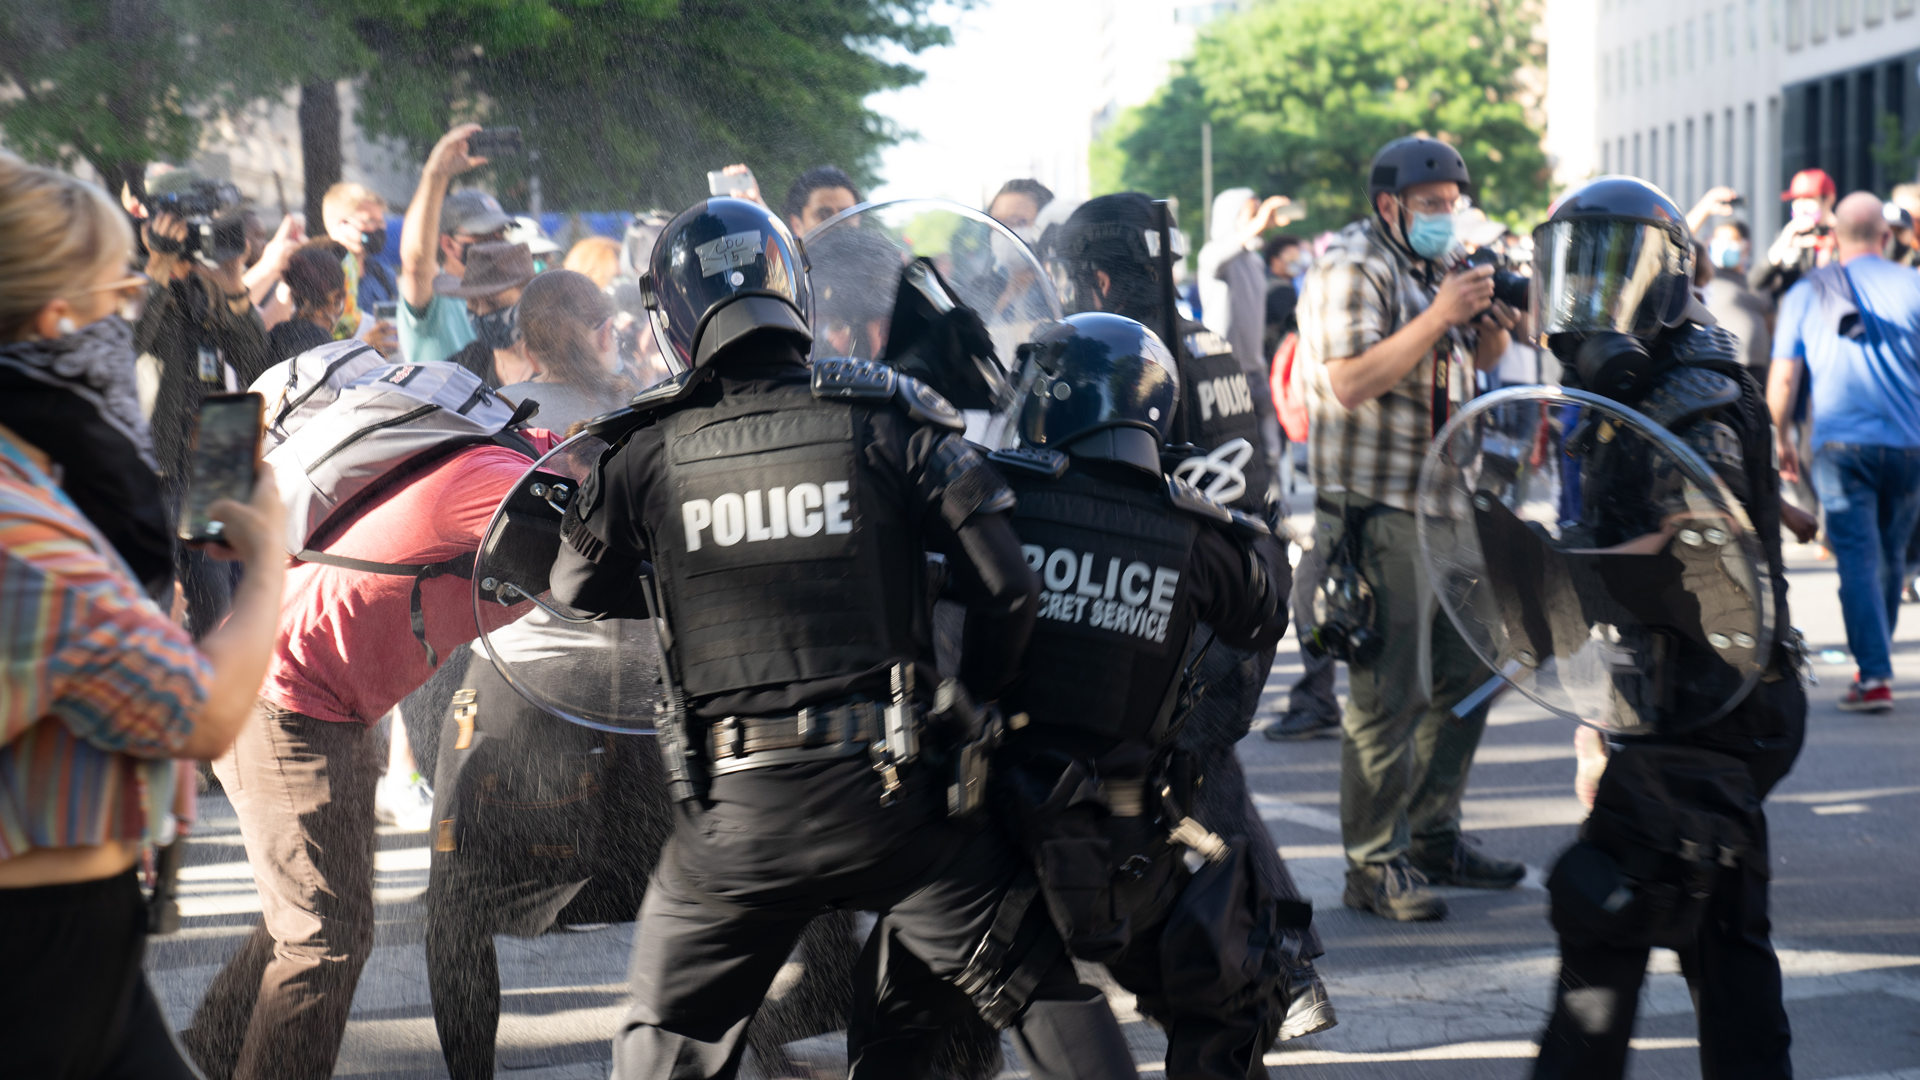 Group of police officers clashing with a crowd of protesters at 2020 George Floyd riot in DC